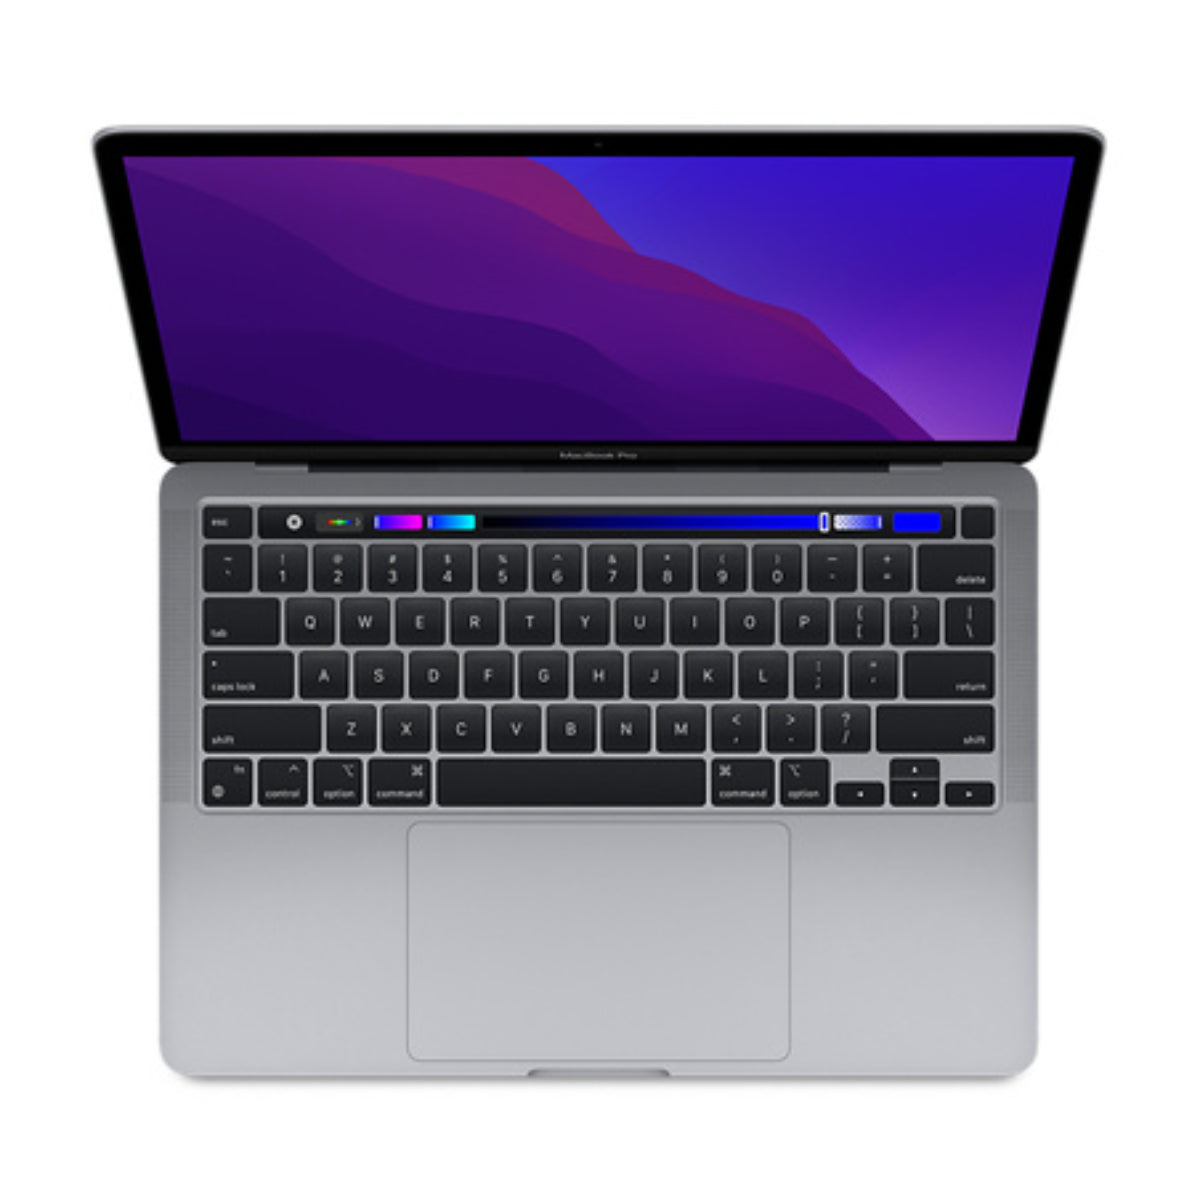 13-Inch MacBook Pro: Apple M1 Chip with 8-Core CPU and 8-Core GPU, 512GB SSD - Space Grey